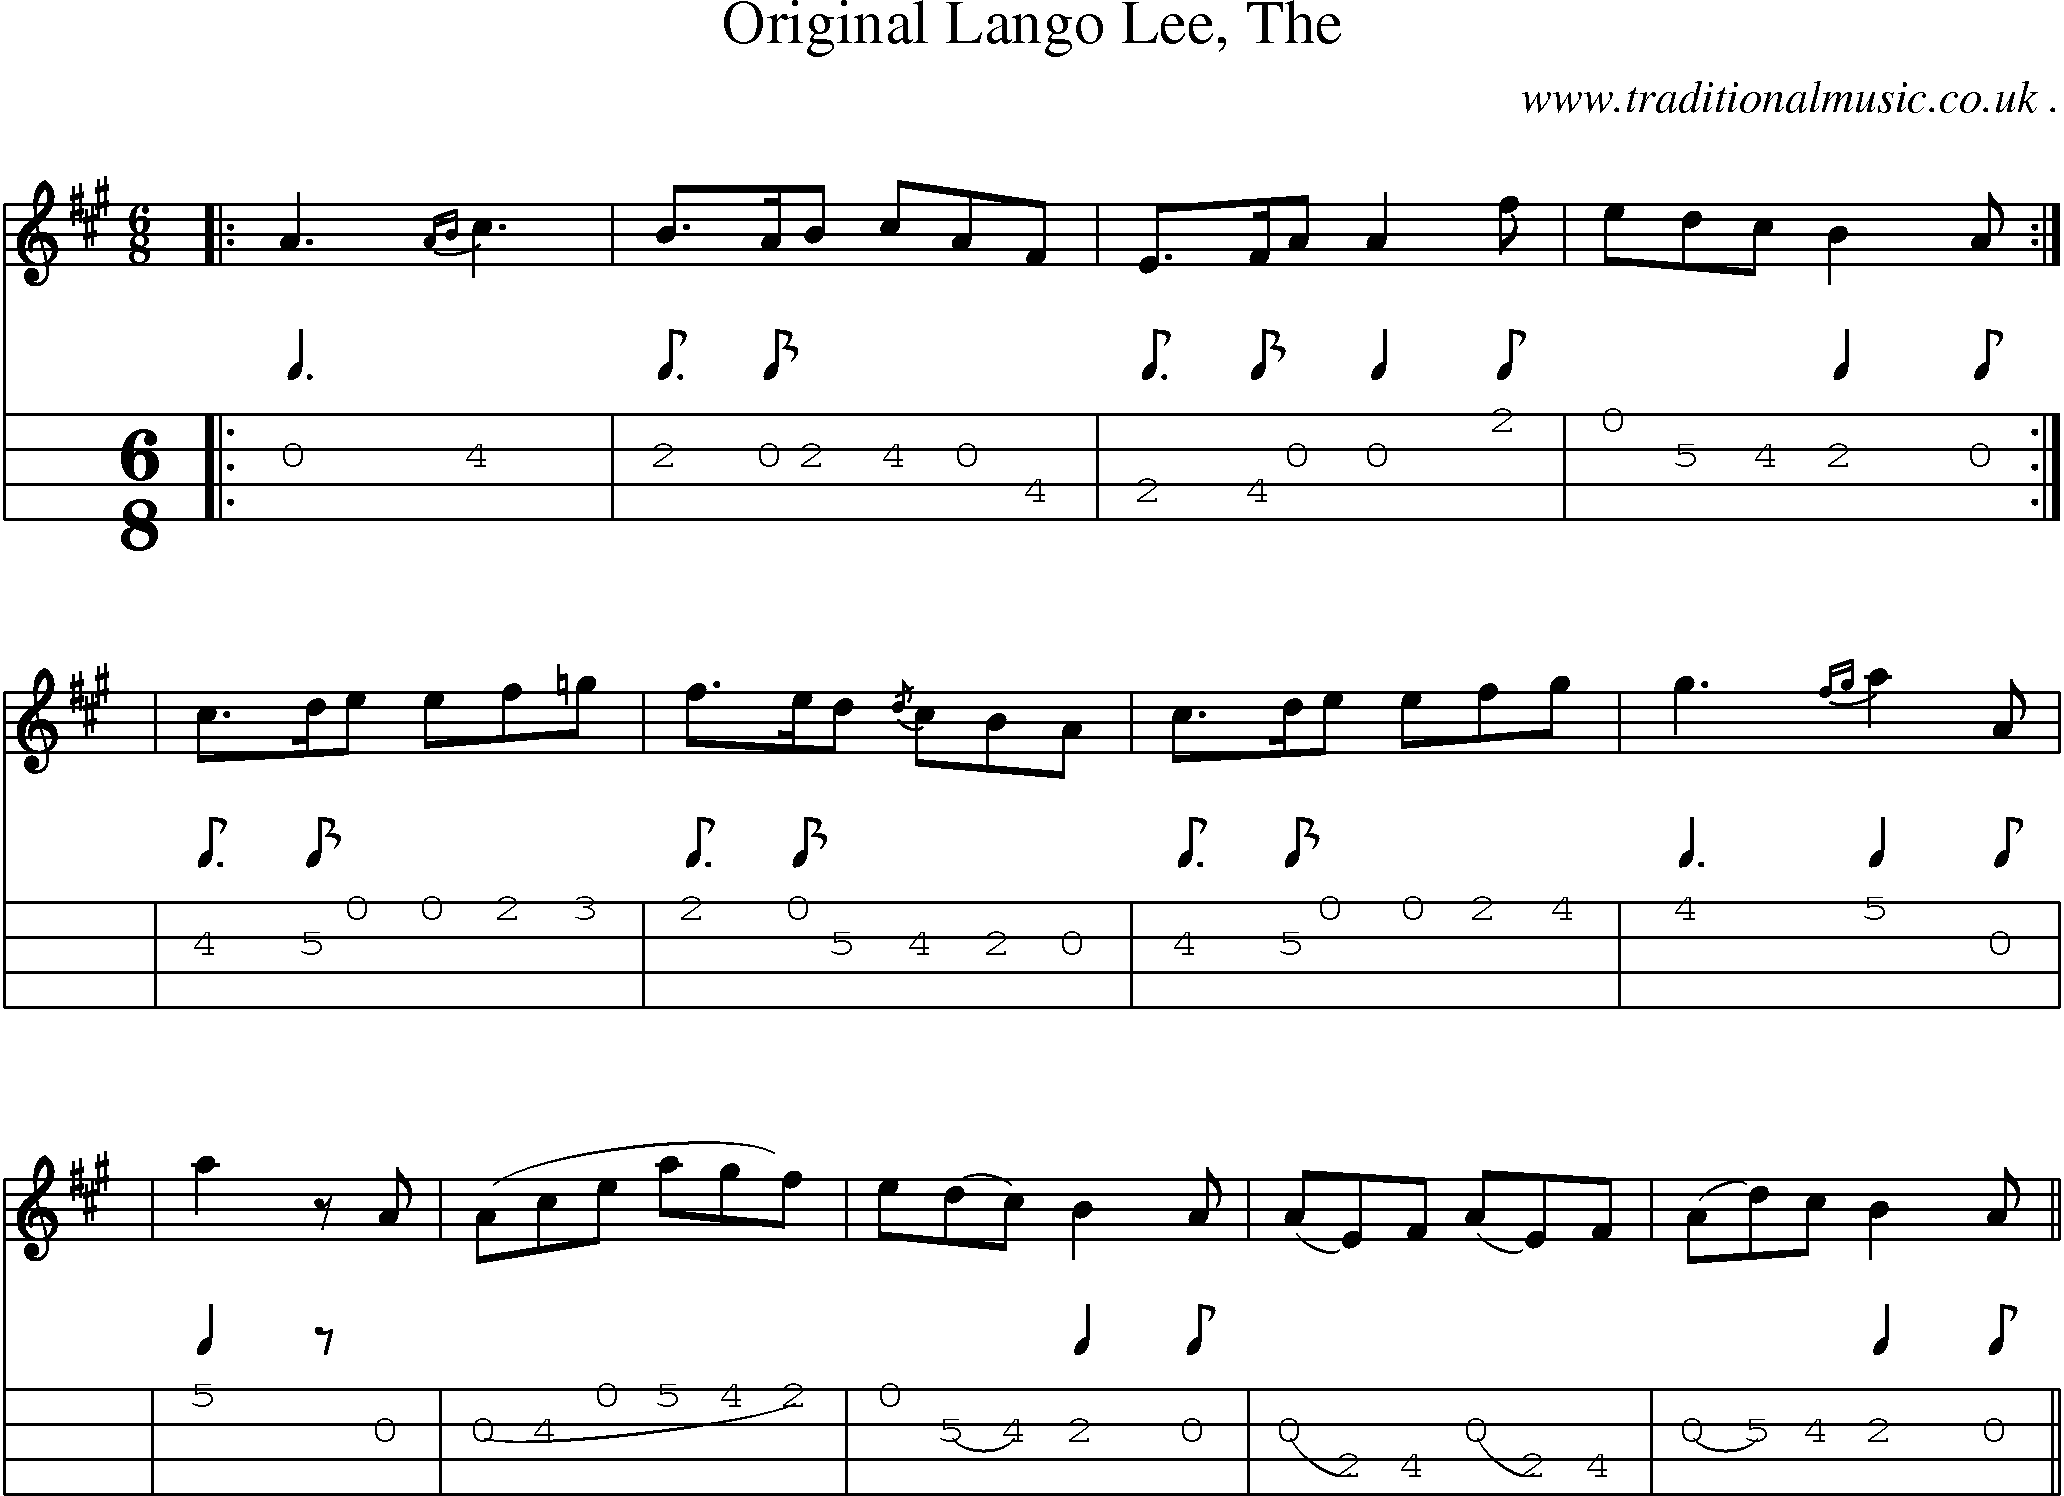 Sheet-music  score, Chords and Mandolin Tabs for Original Lango Lee The